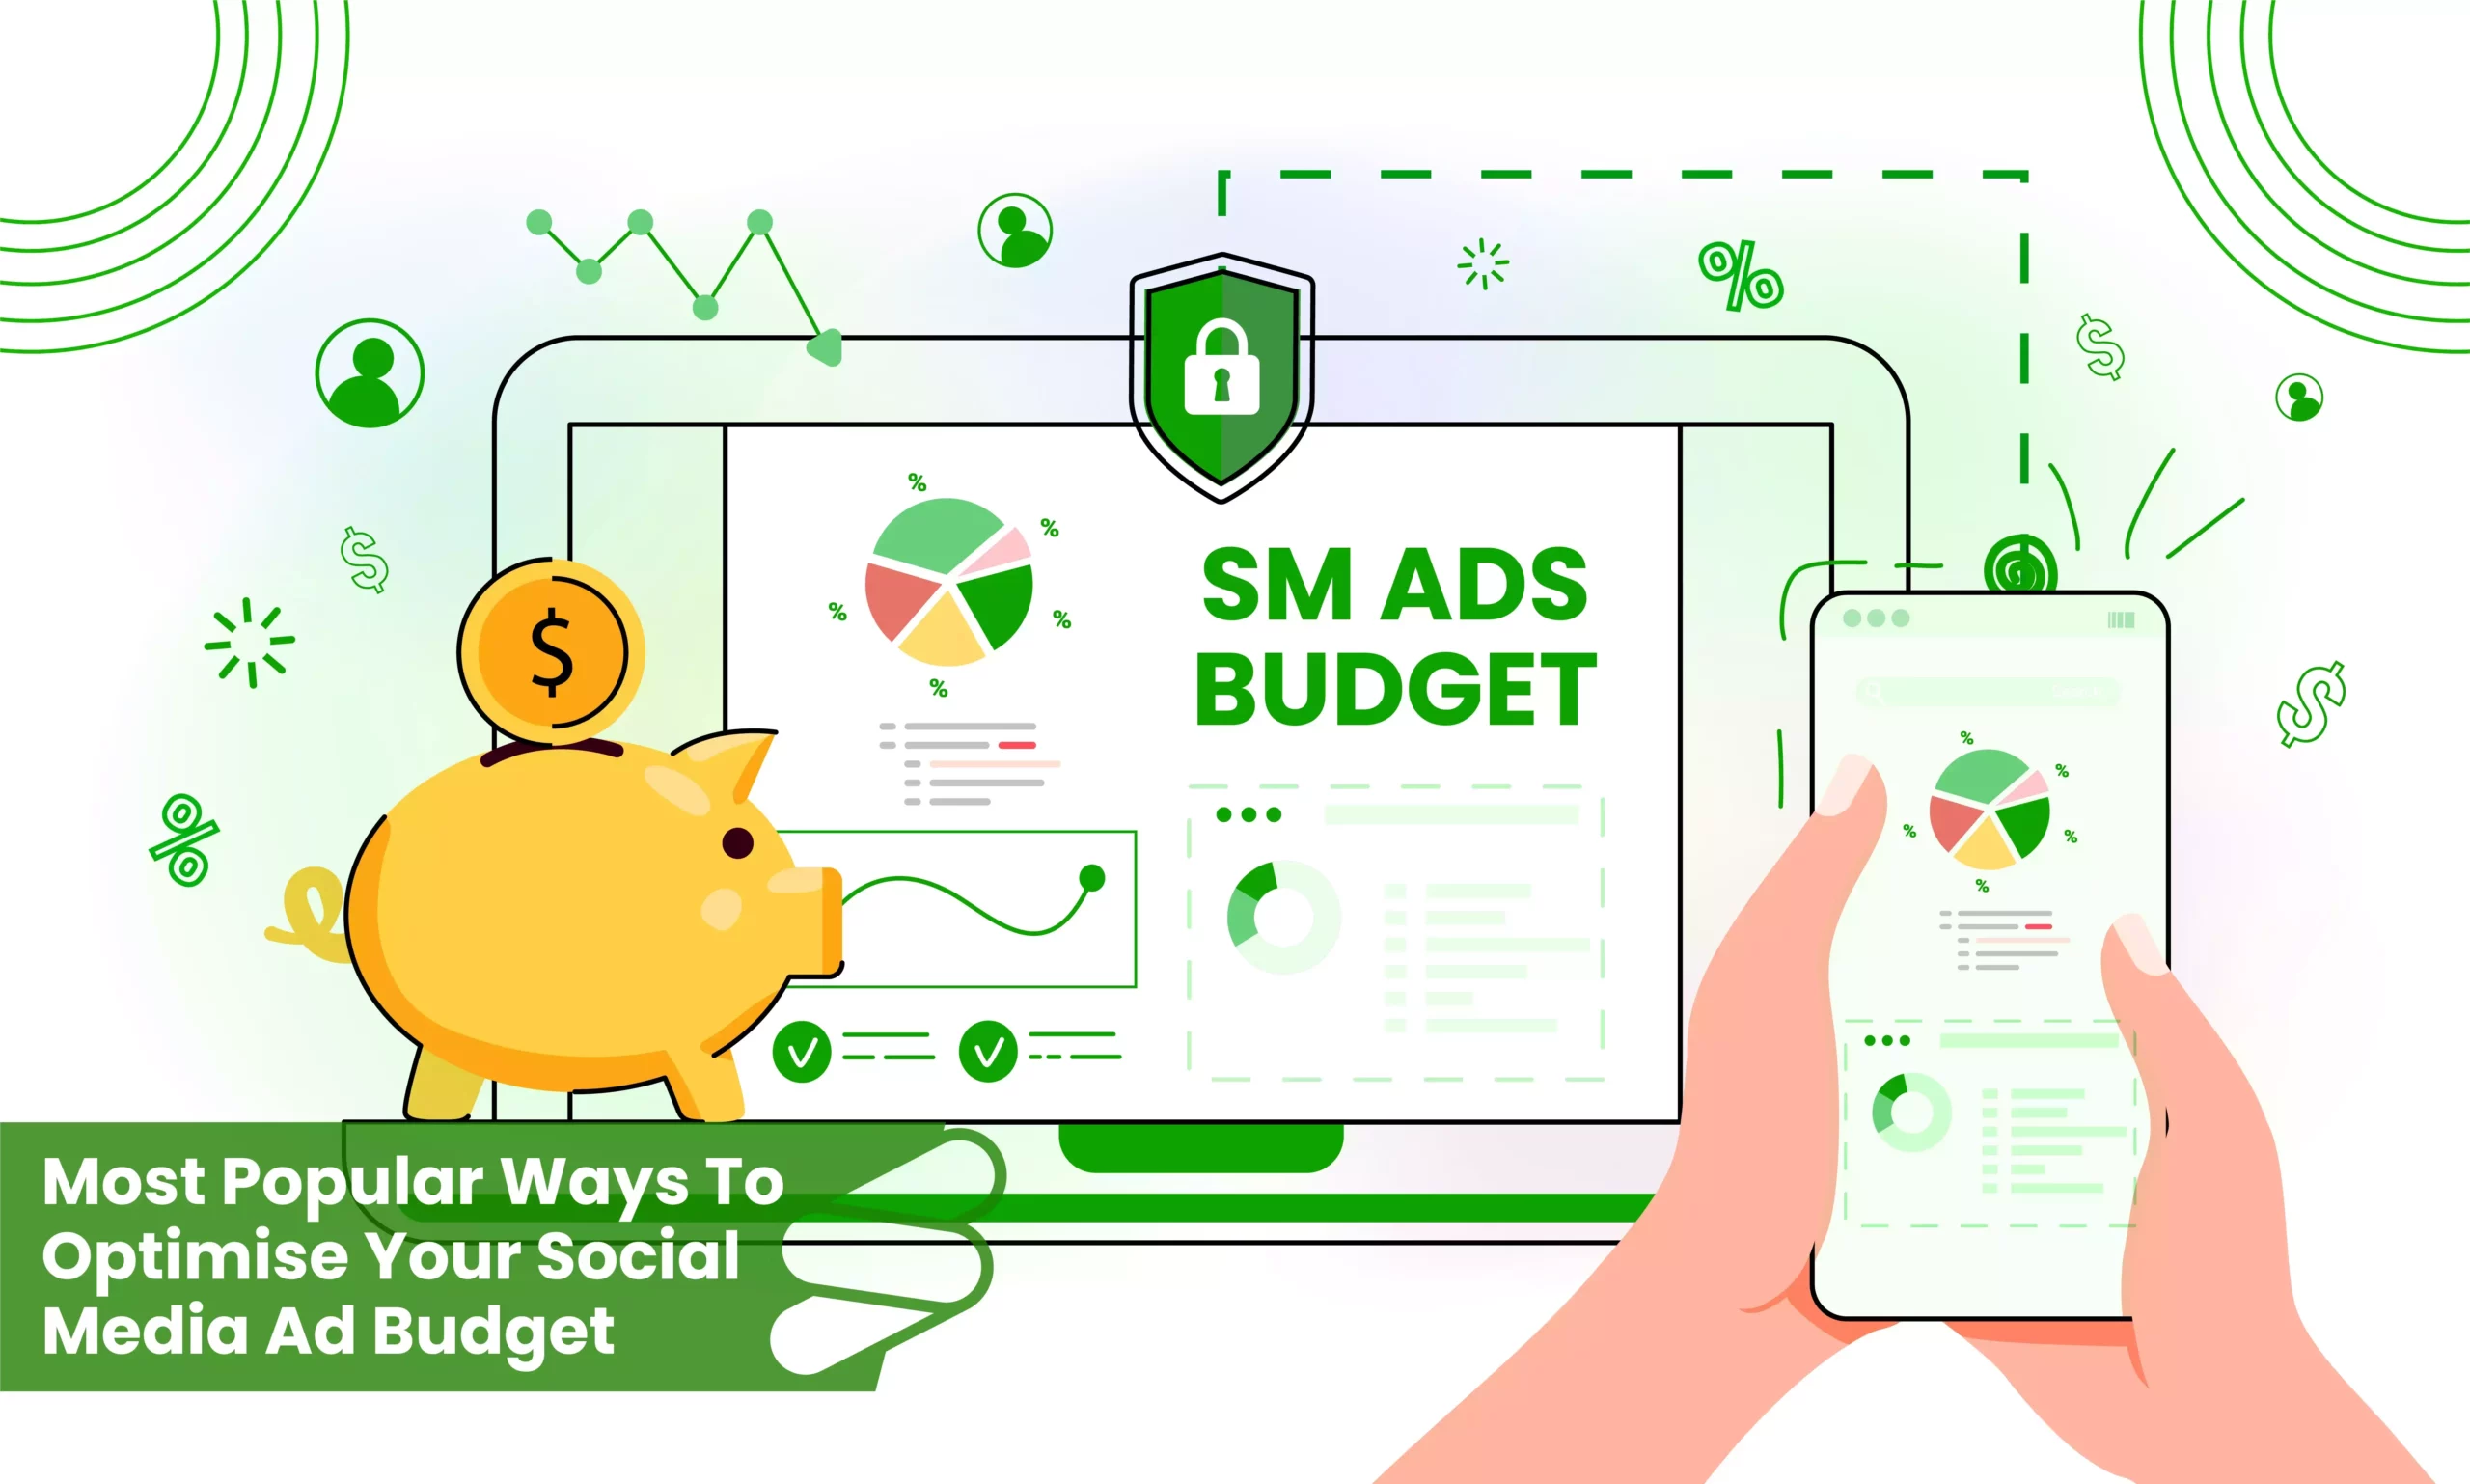 Optimise Your Social Media Ad Budget